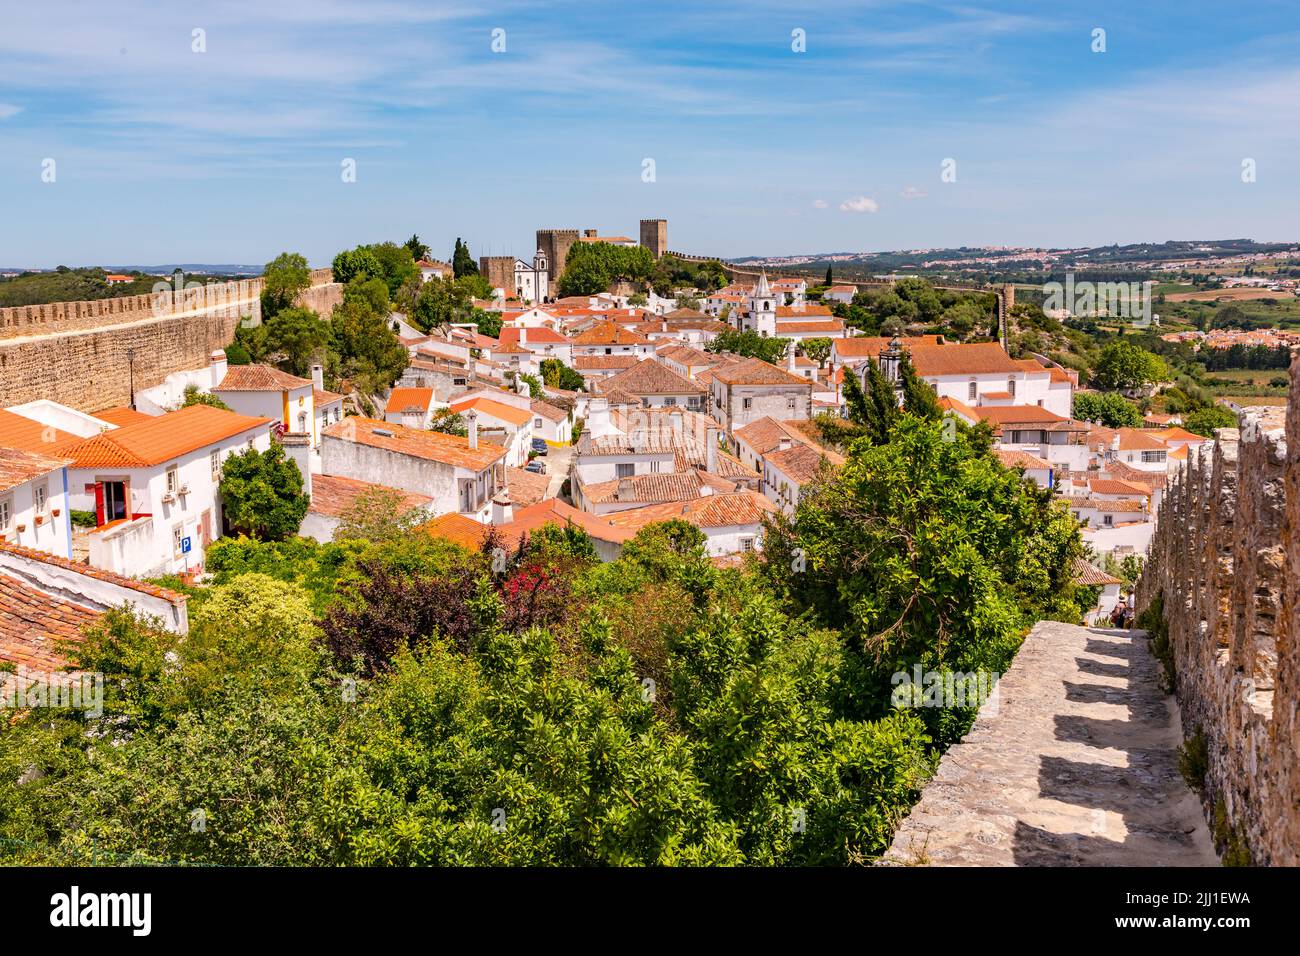 The castle fortress of Obidos with a completely preserved and accessible city wall and the Castelo de Obidos, Portugal Stock Photo